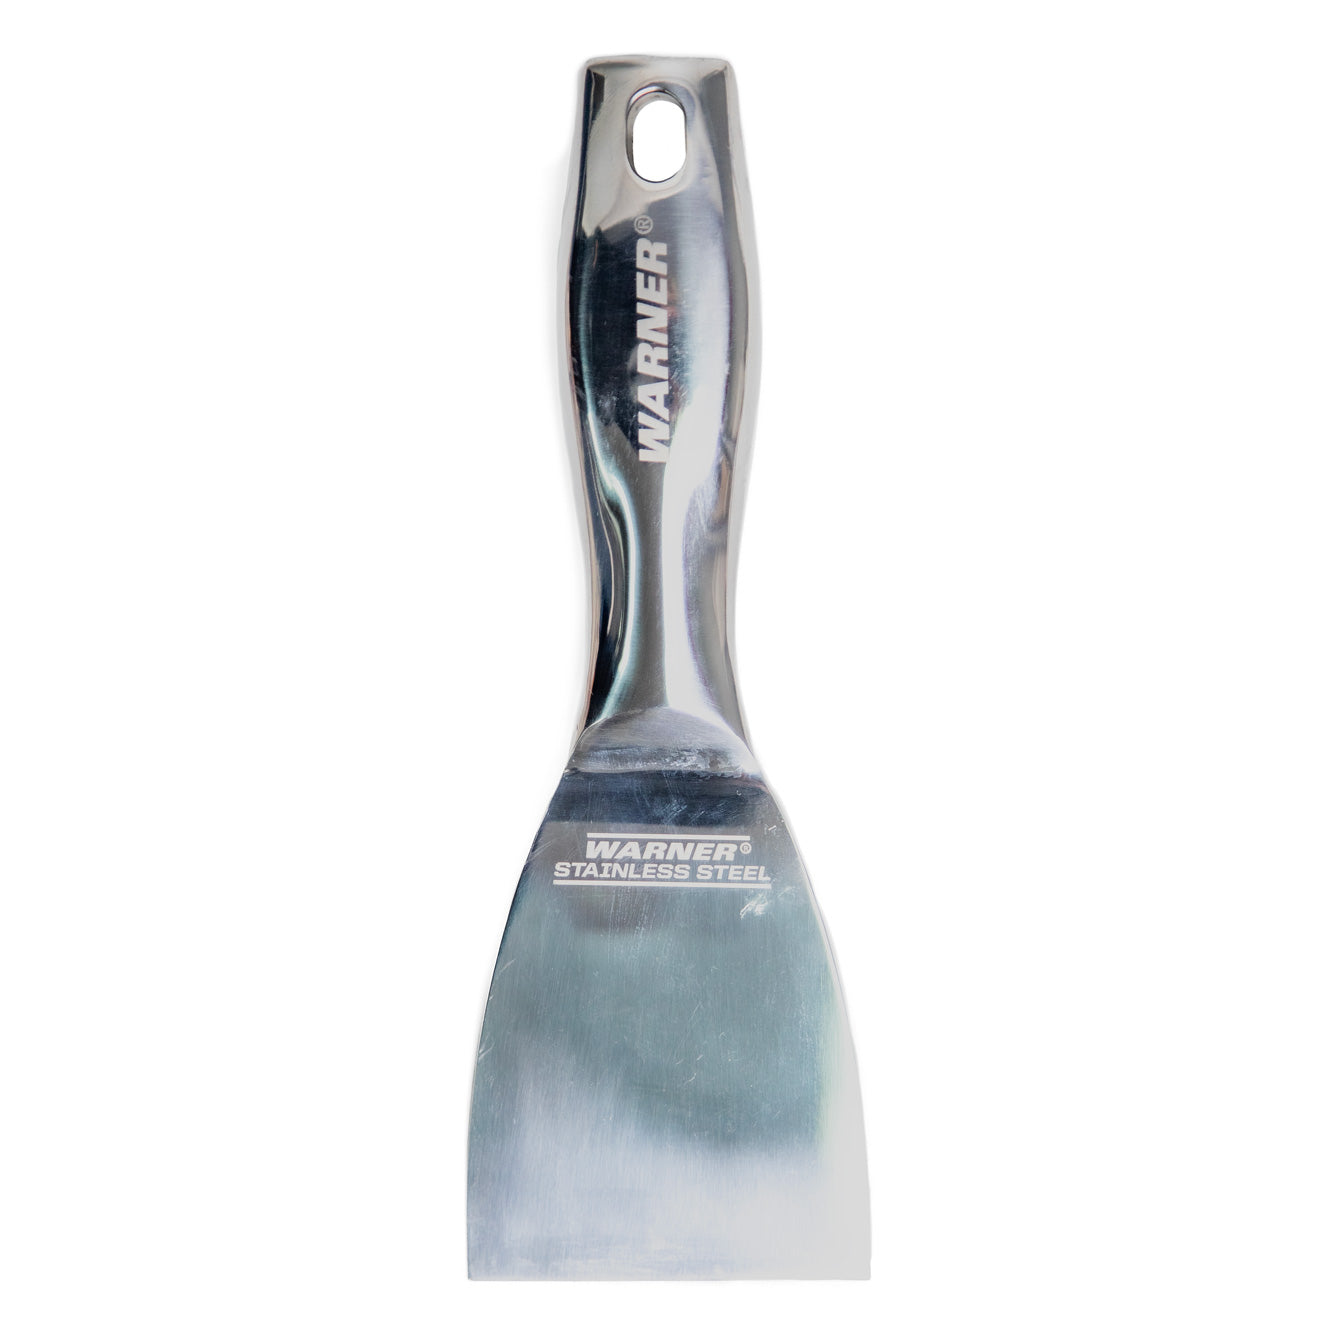 Pro-Stainless 3" Flex Putty Knife